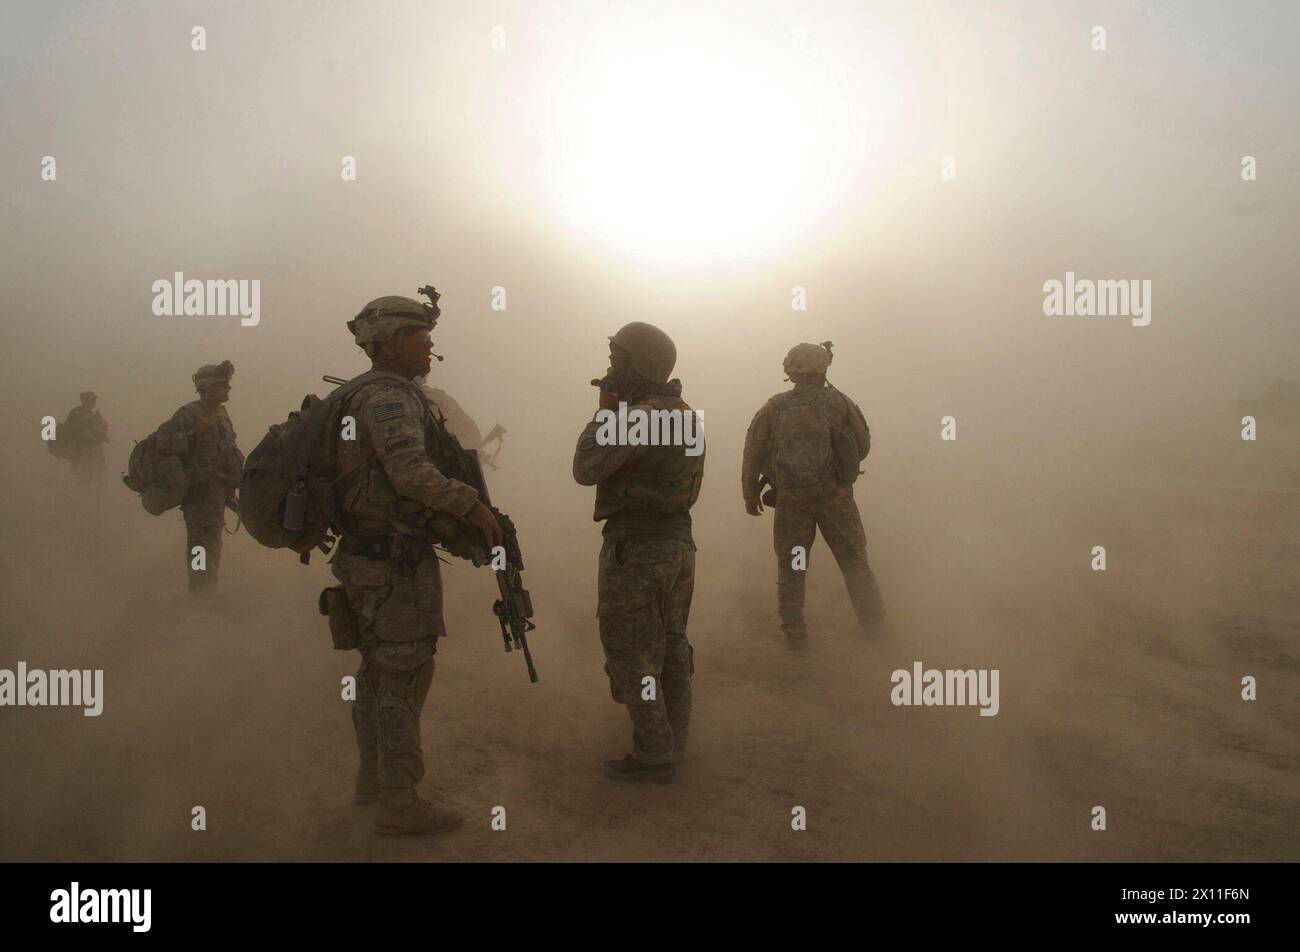 Members of 1st Platoon, Company C, 1st Battalion, 501st Infantry Regiment, 4th Brigade Combat Team (Airborne), 25th Infantry Division, watch as CH-47 Chinook Helicopters circle above during a dust storm at Forward Operating Base Kushamond, Afghanistan, during preparation for an air-assault mission ca. September 07, 2004 (metadata lists year as 2009) Stock Photo